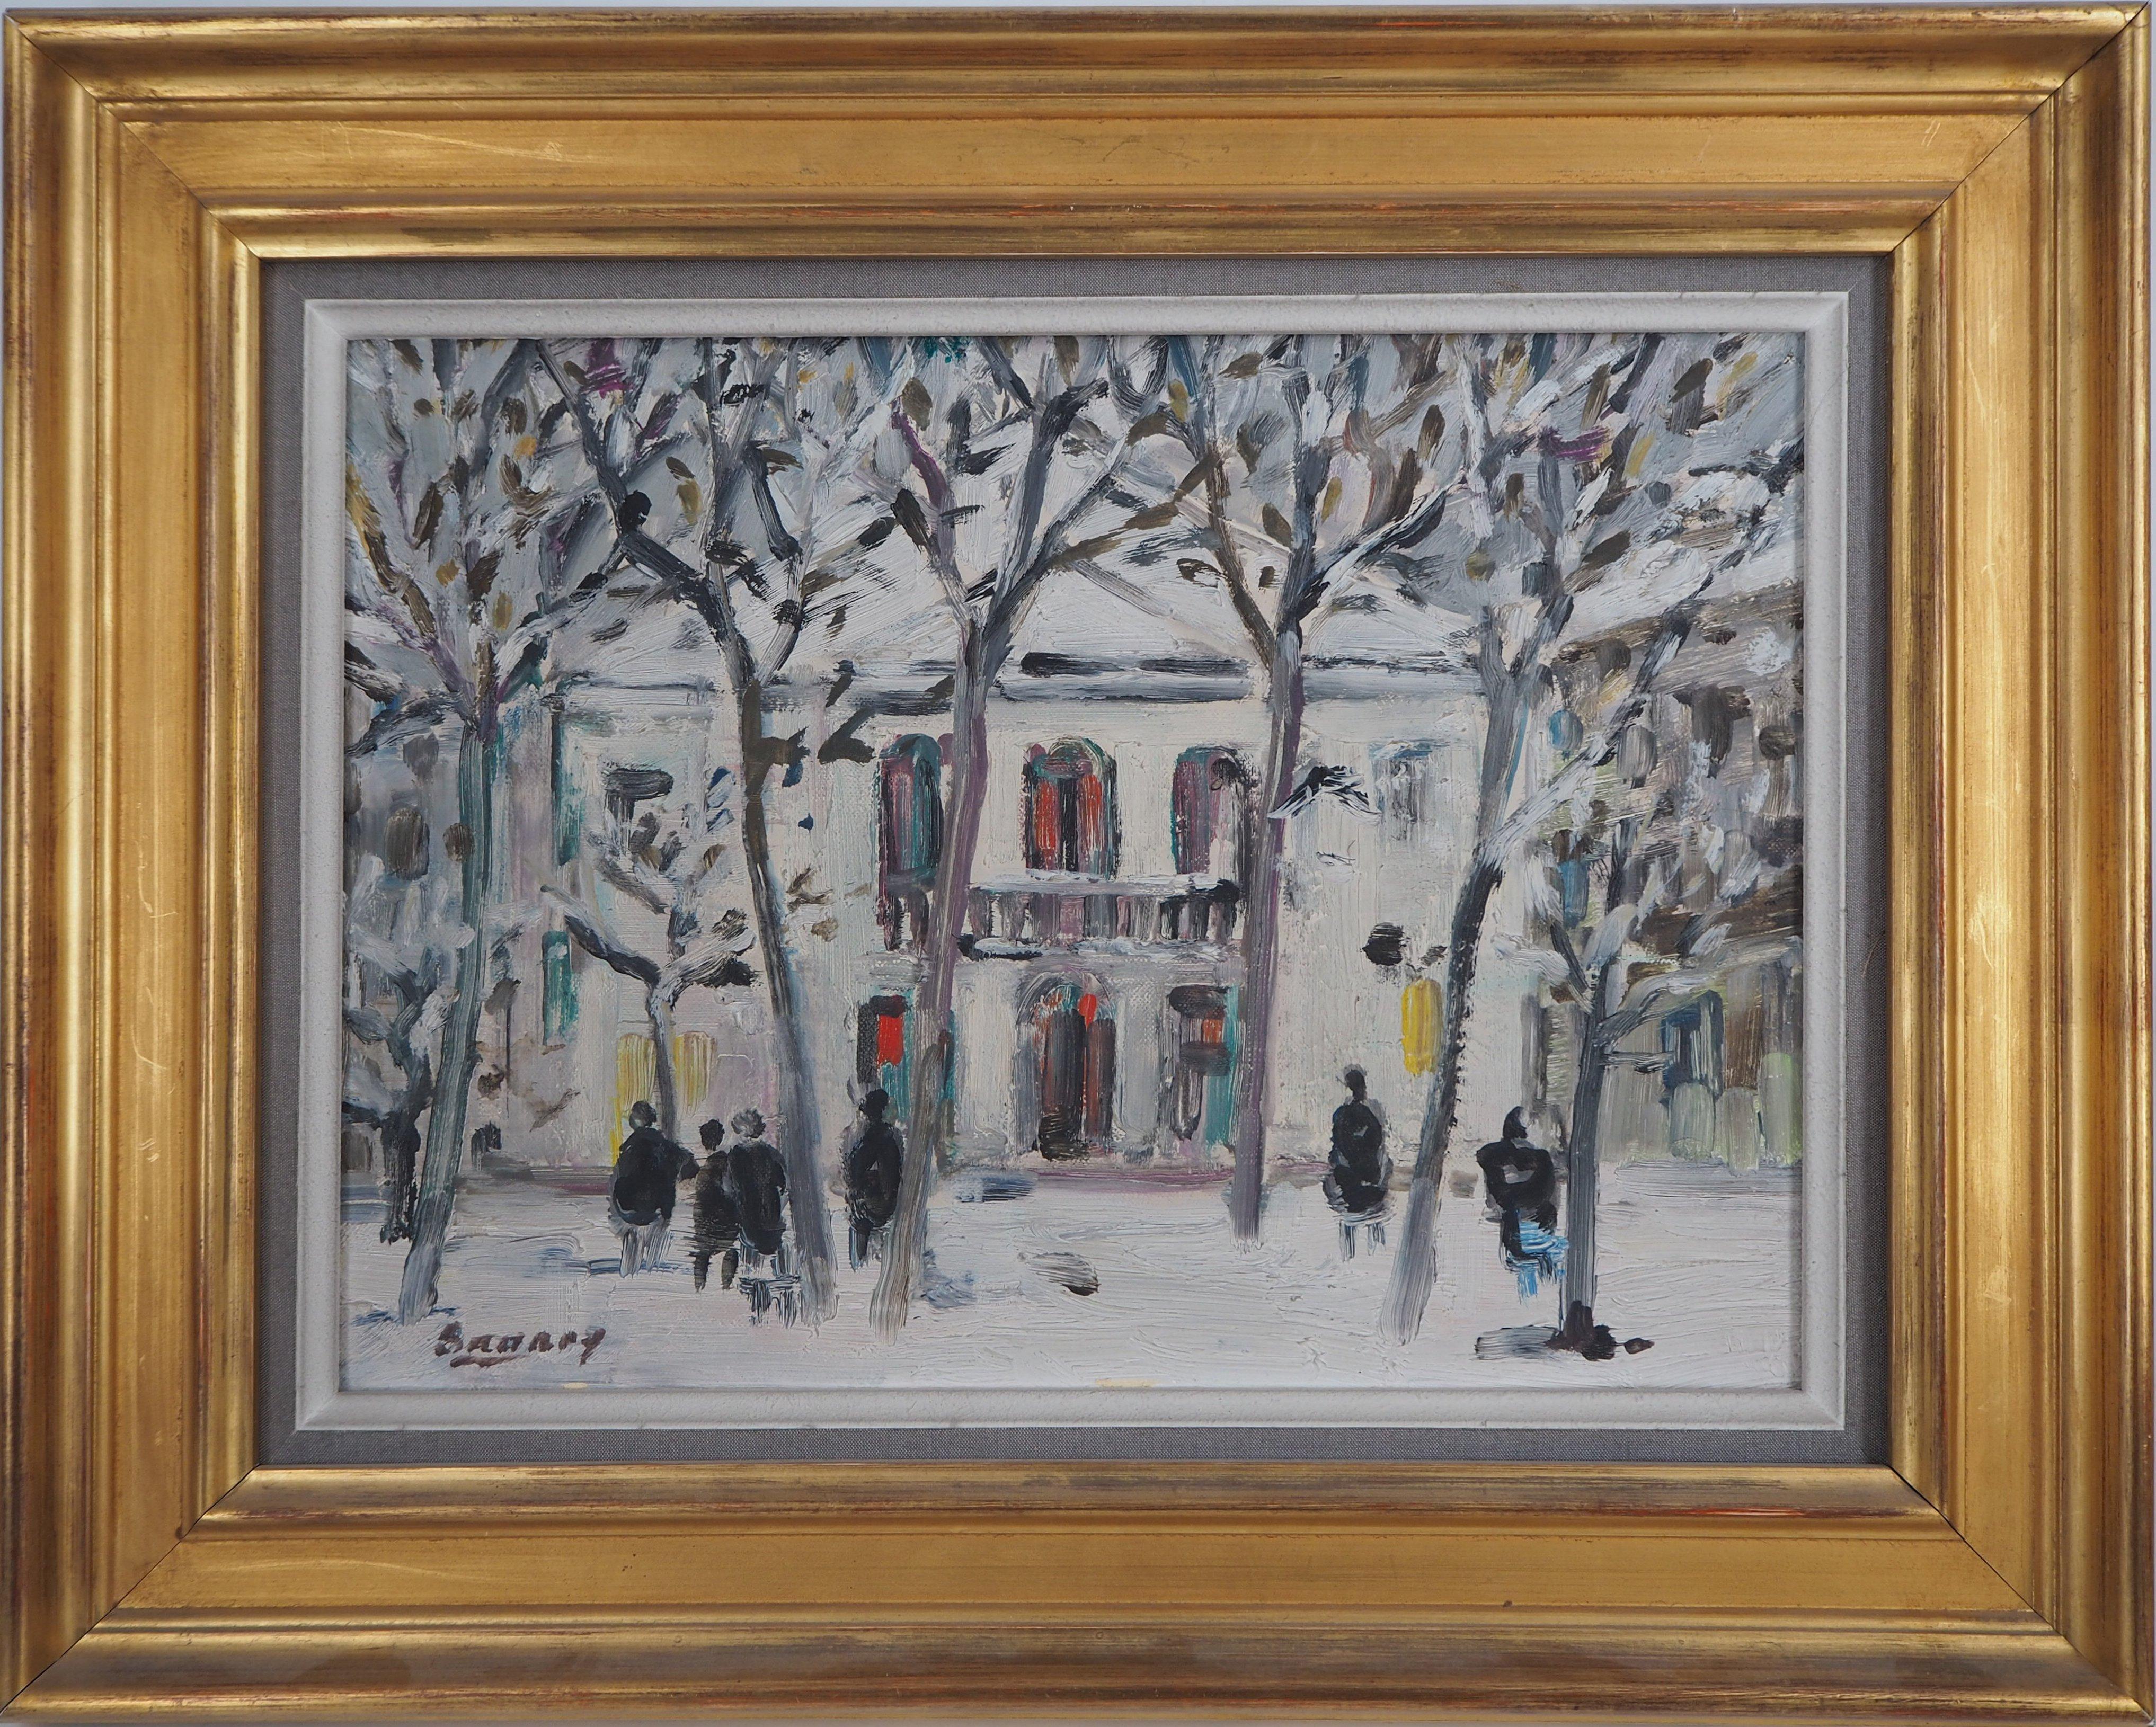 Robert Savary Landscape Painting - Paris : Snow on Atelier Theater in Montmartre - Original oil on canvas, signed